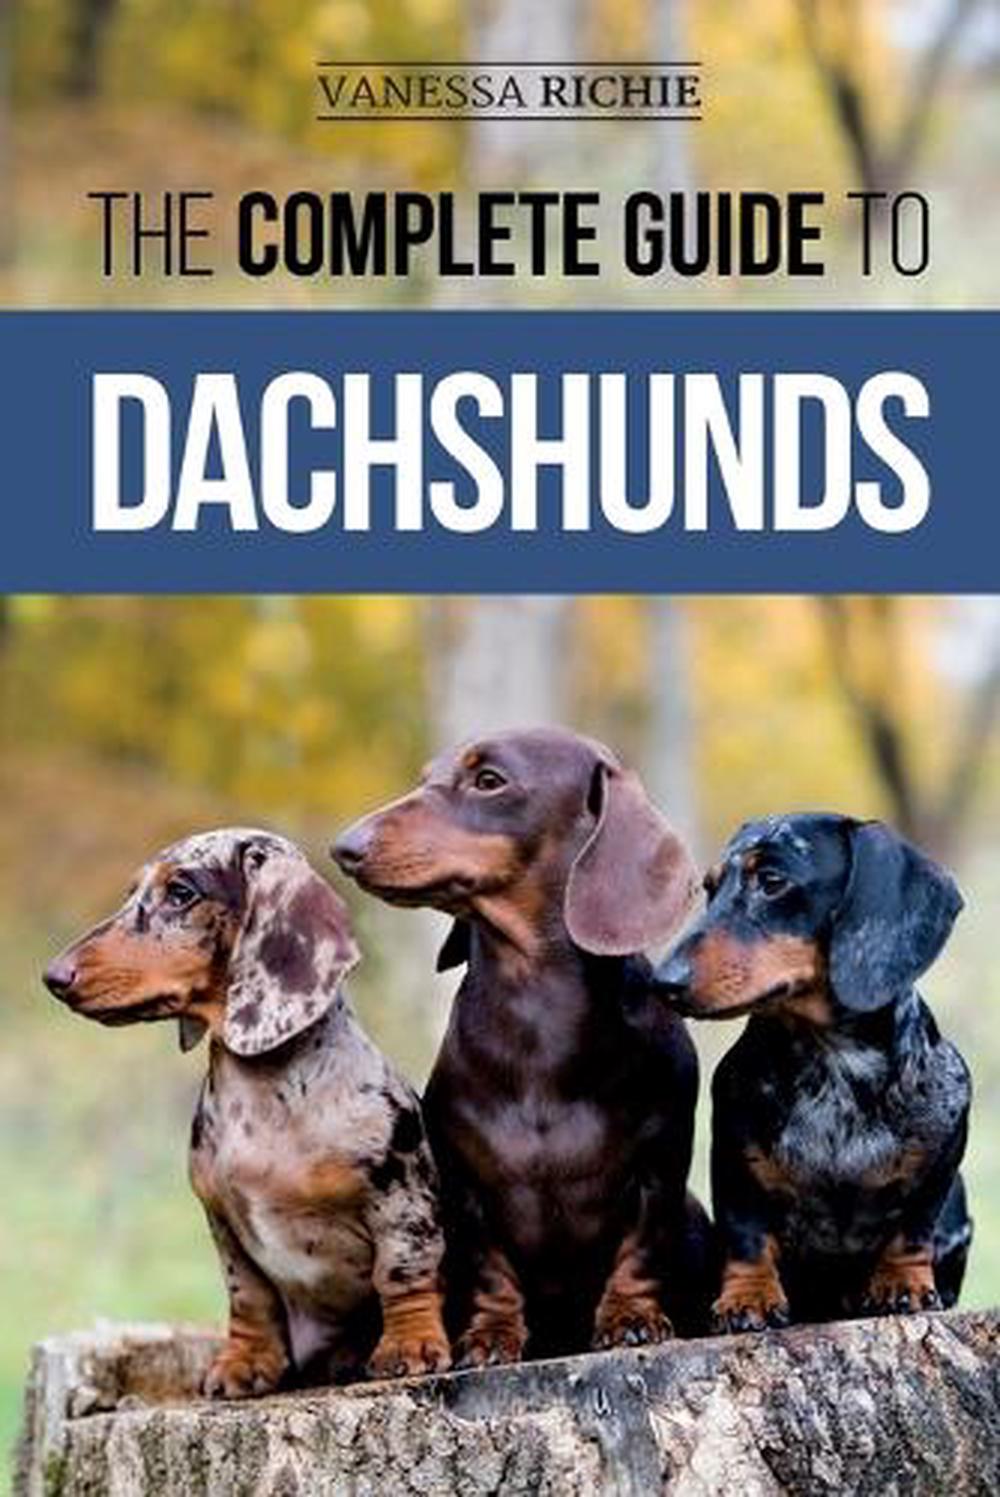 The Complete Guide to Dachshunds Finding, Feeding